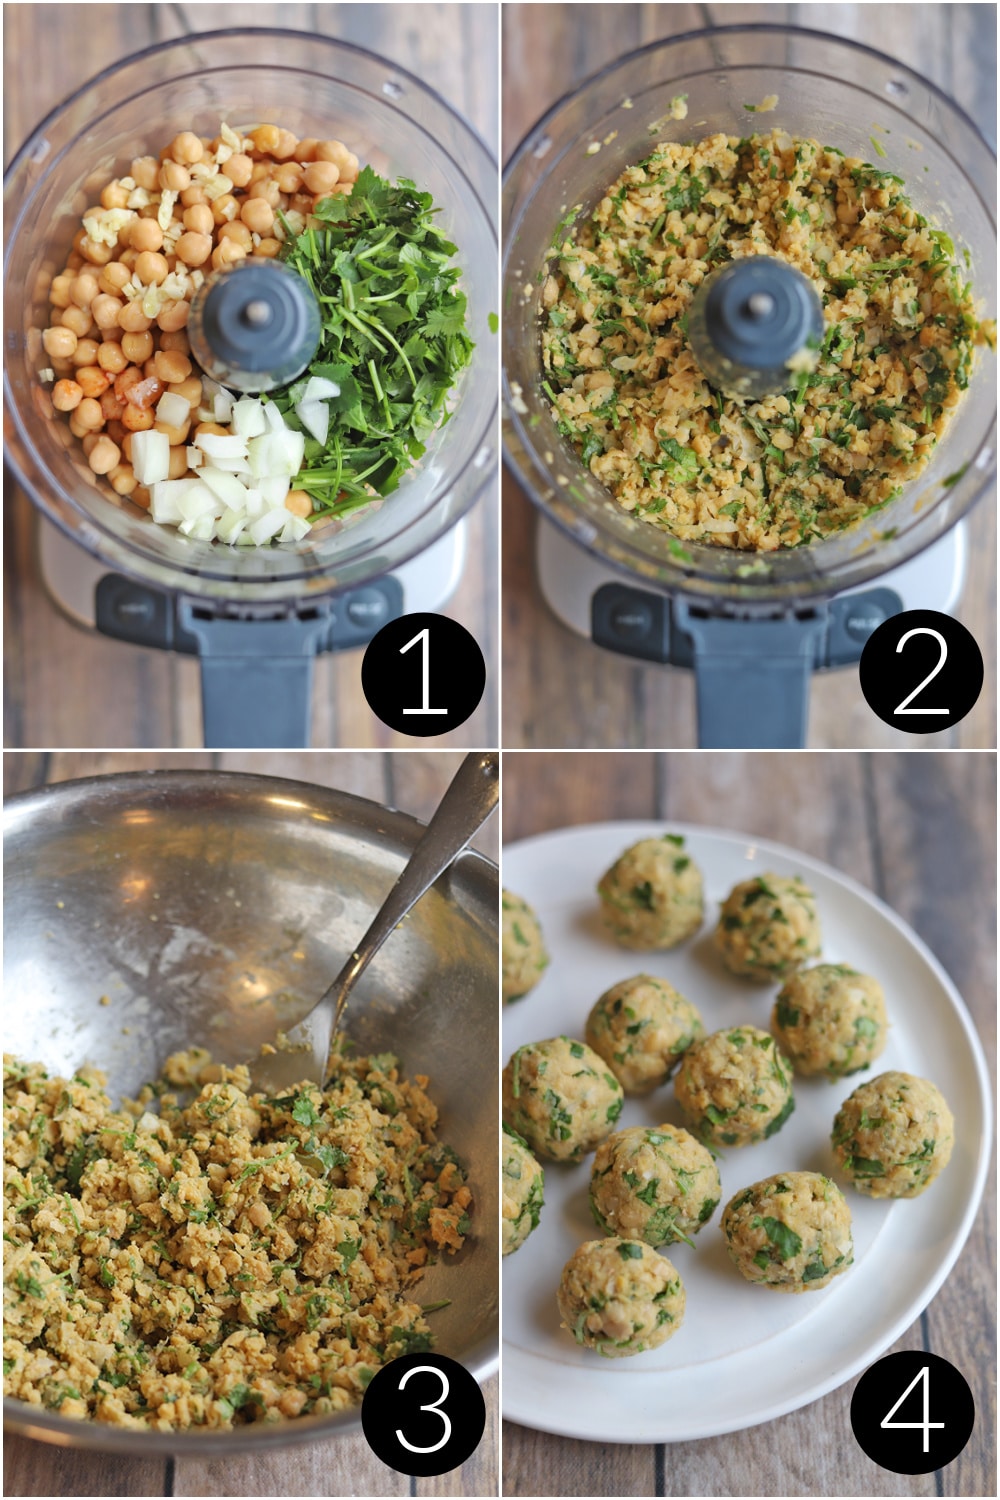 Collage showing how to make falafel mixture in food processor & form into balls.